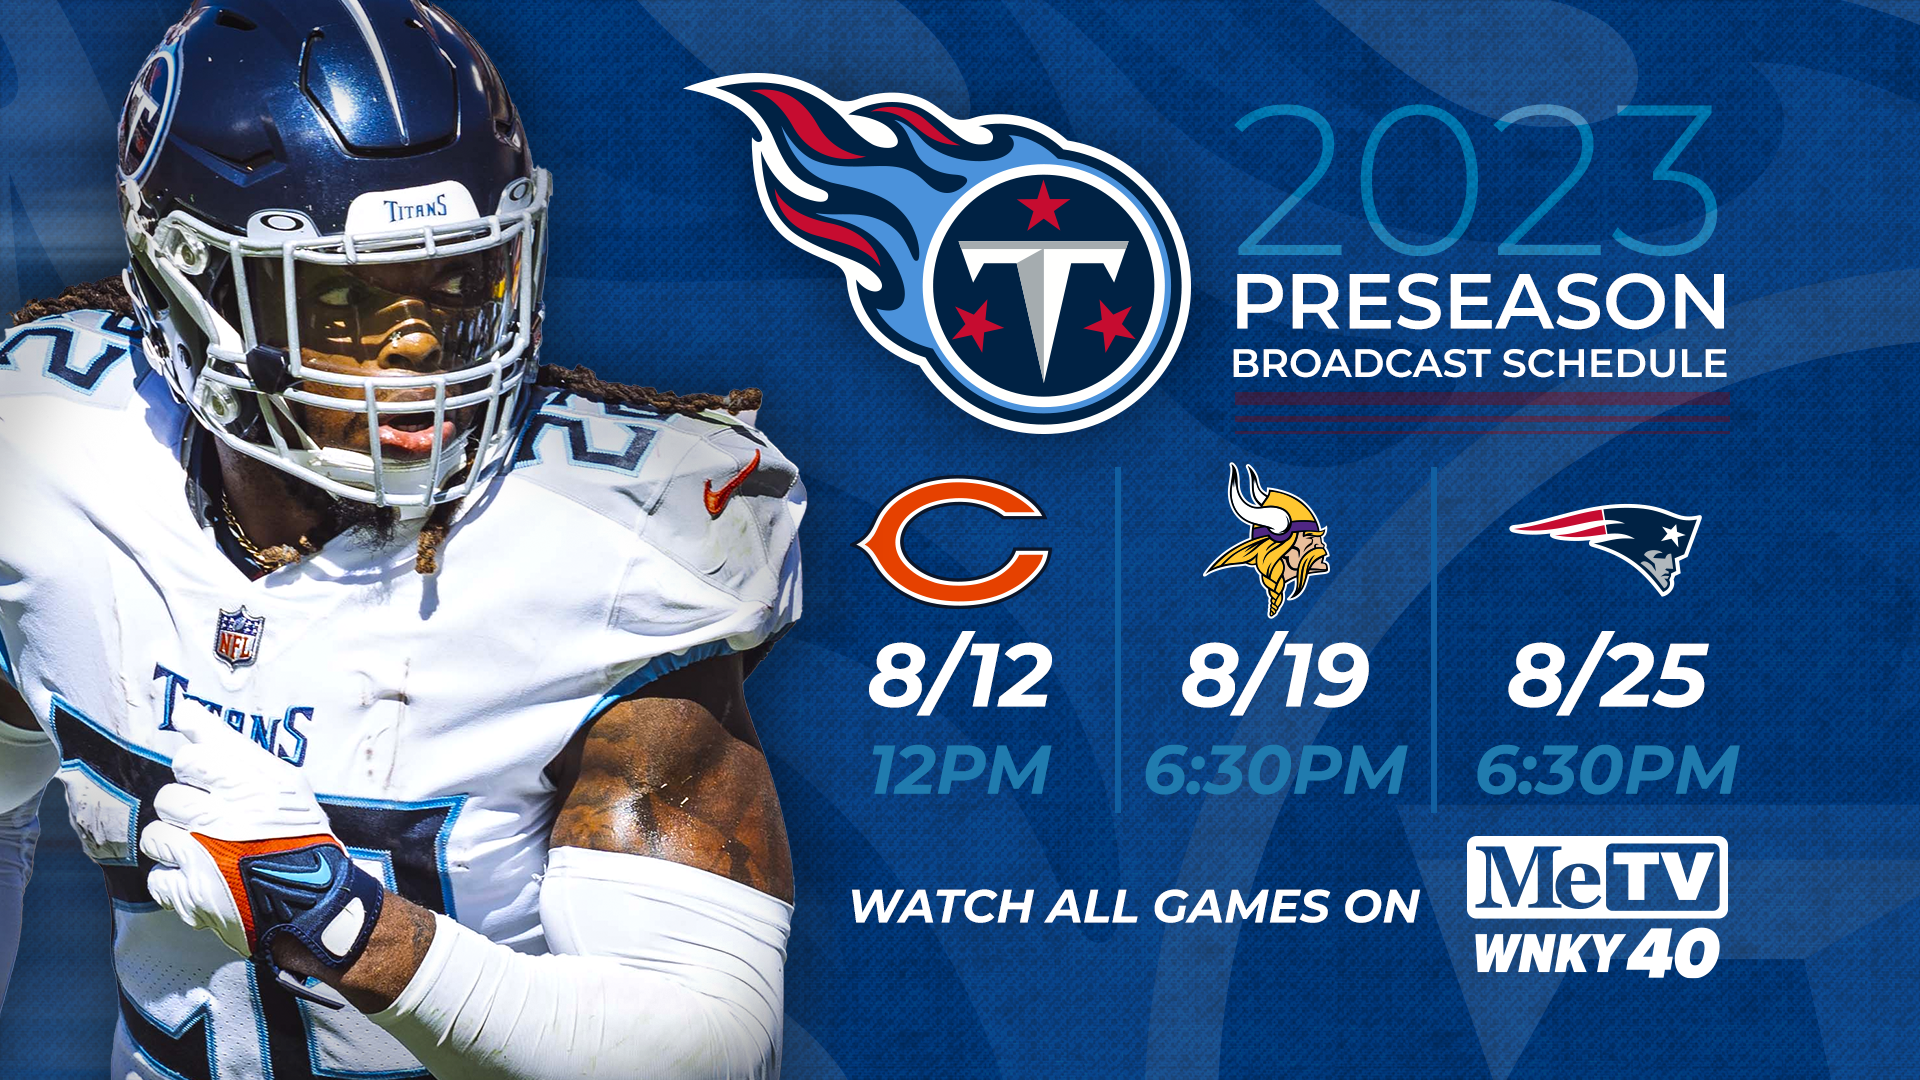 WNKY News 40 to broadcast Titans preseason games - WNKY News 40 Television